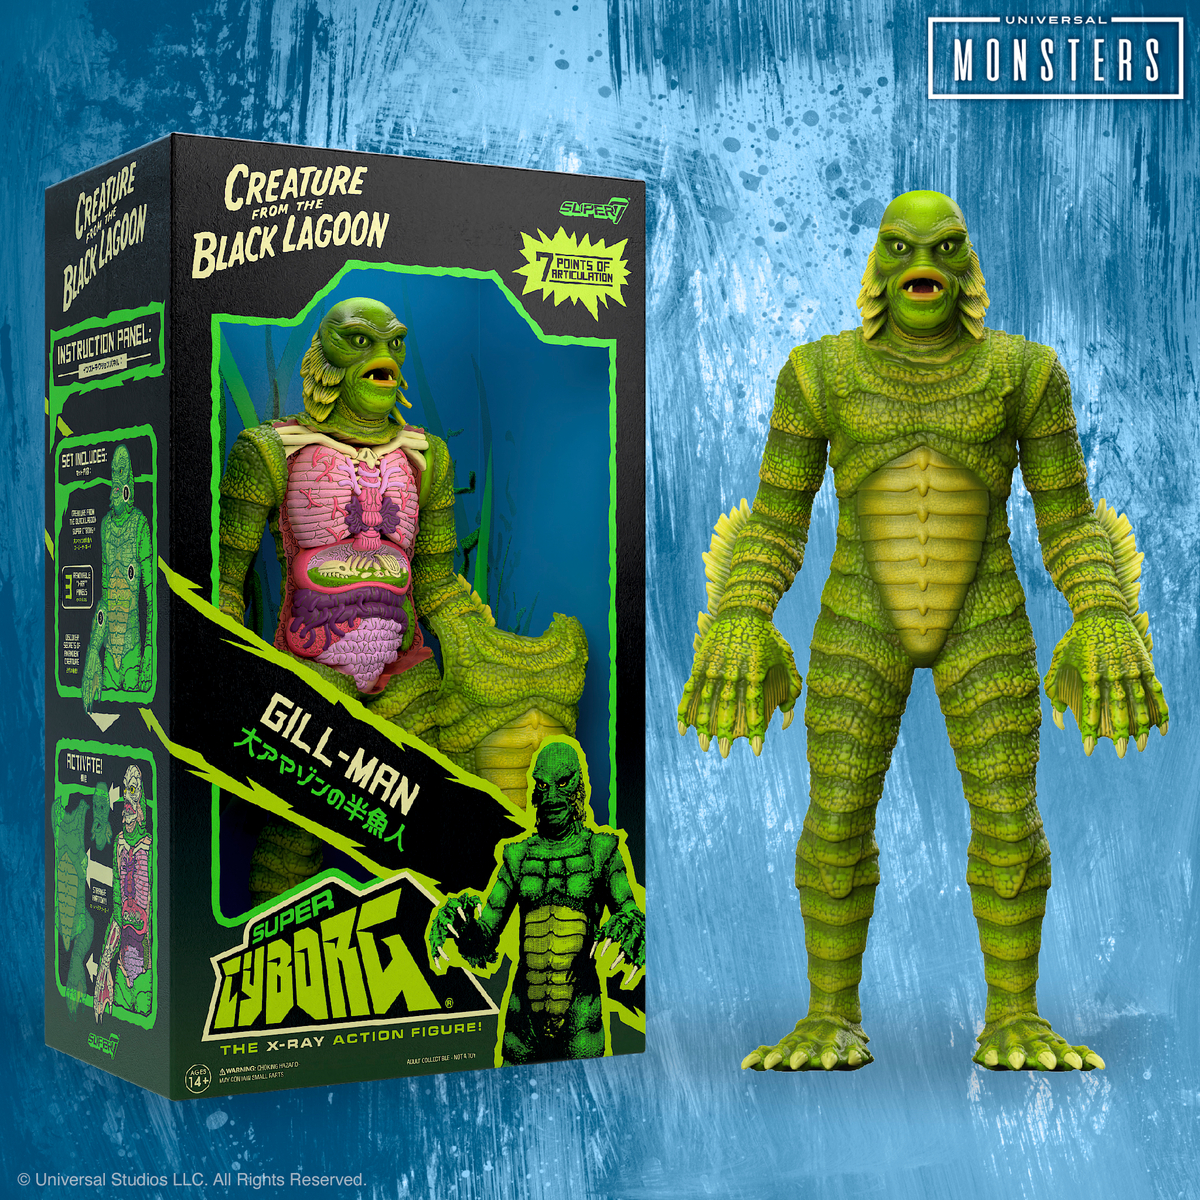 What’s inside the Creature? Emerging this fall. #Super7